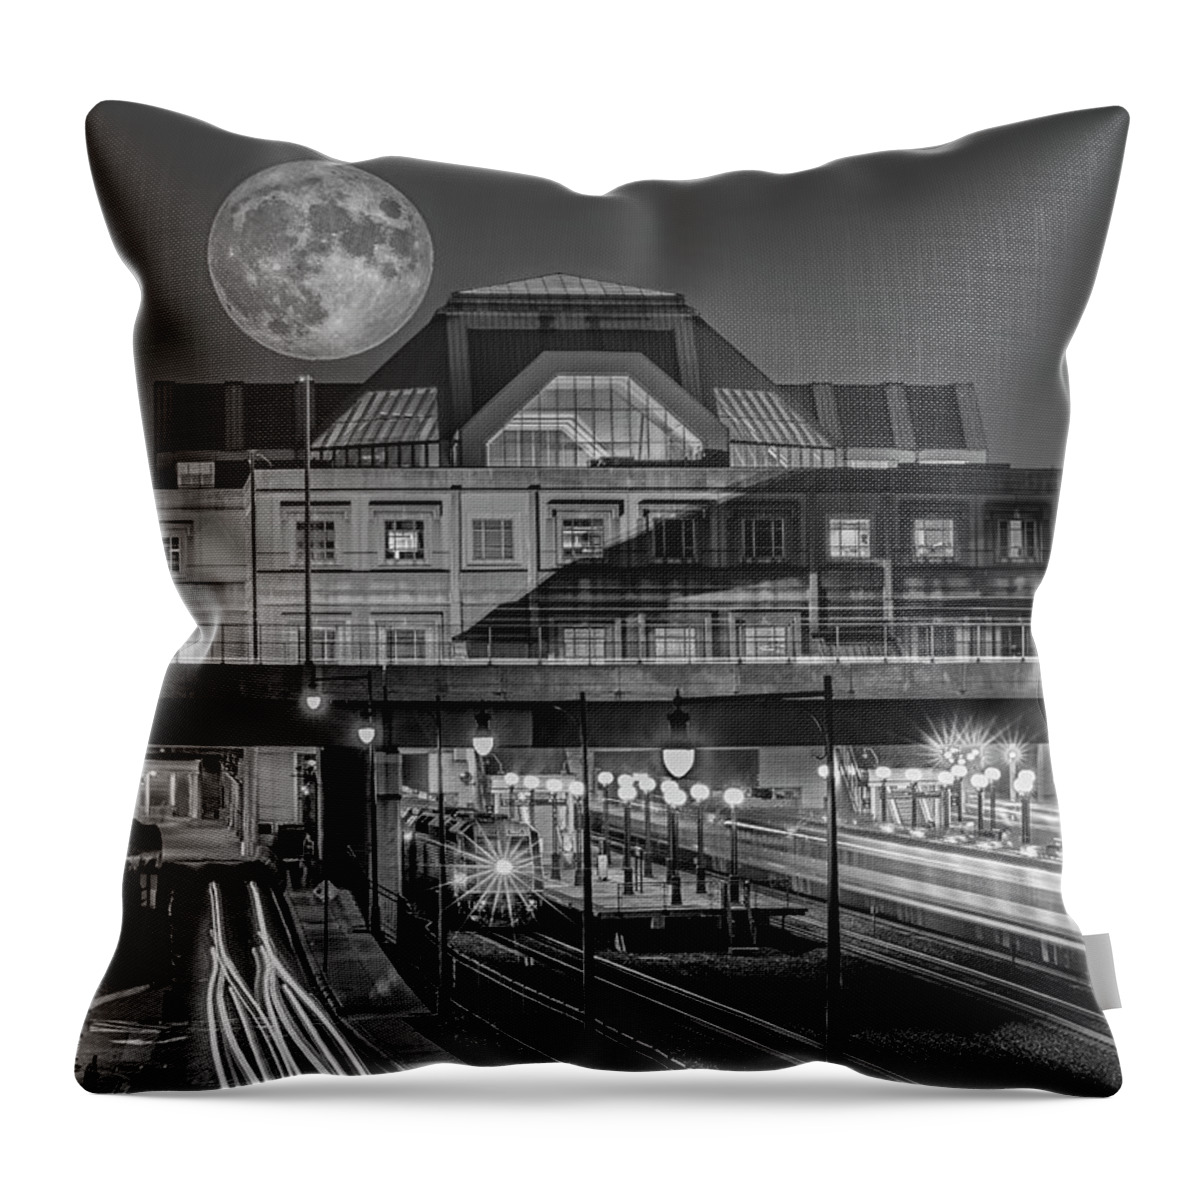 Super Moon Throw Pillow featuring the photograph Sturgeon Super Moon BW by Susan Candelario